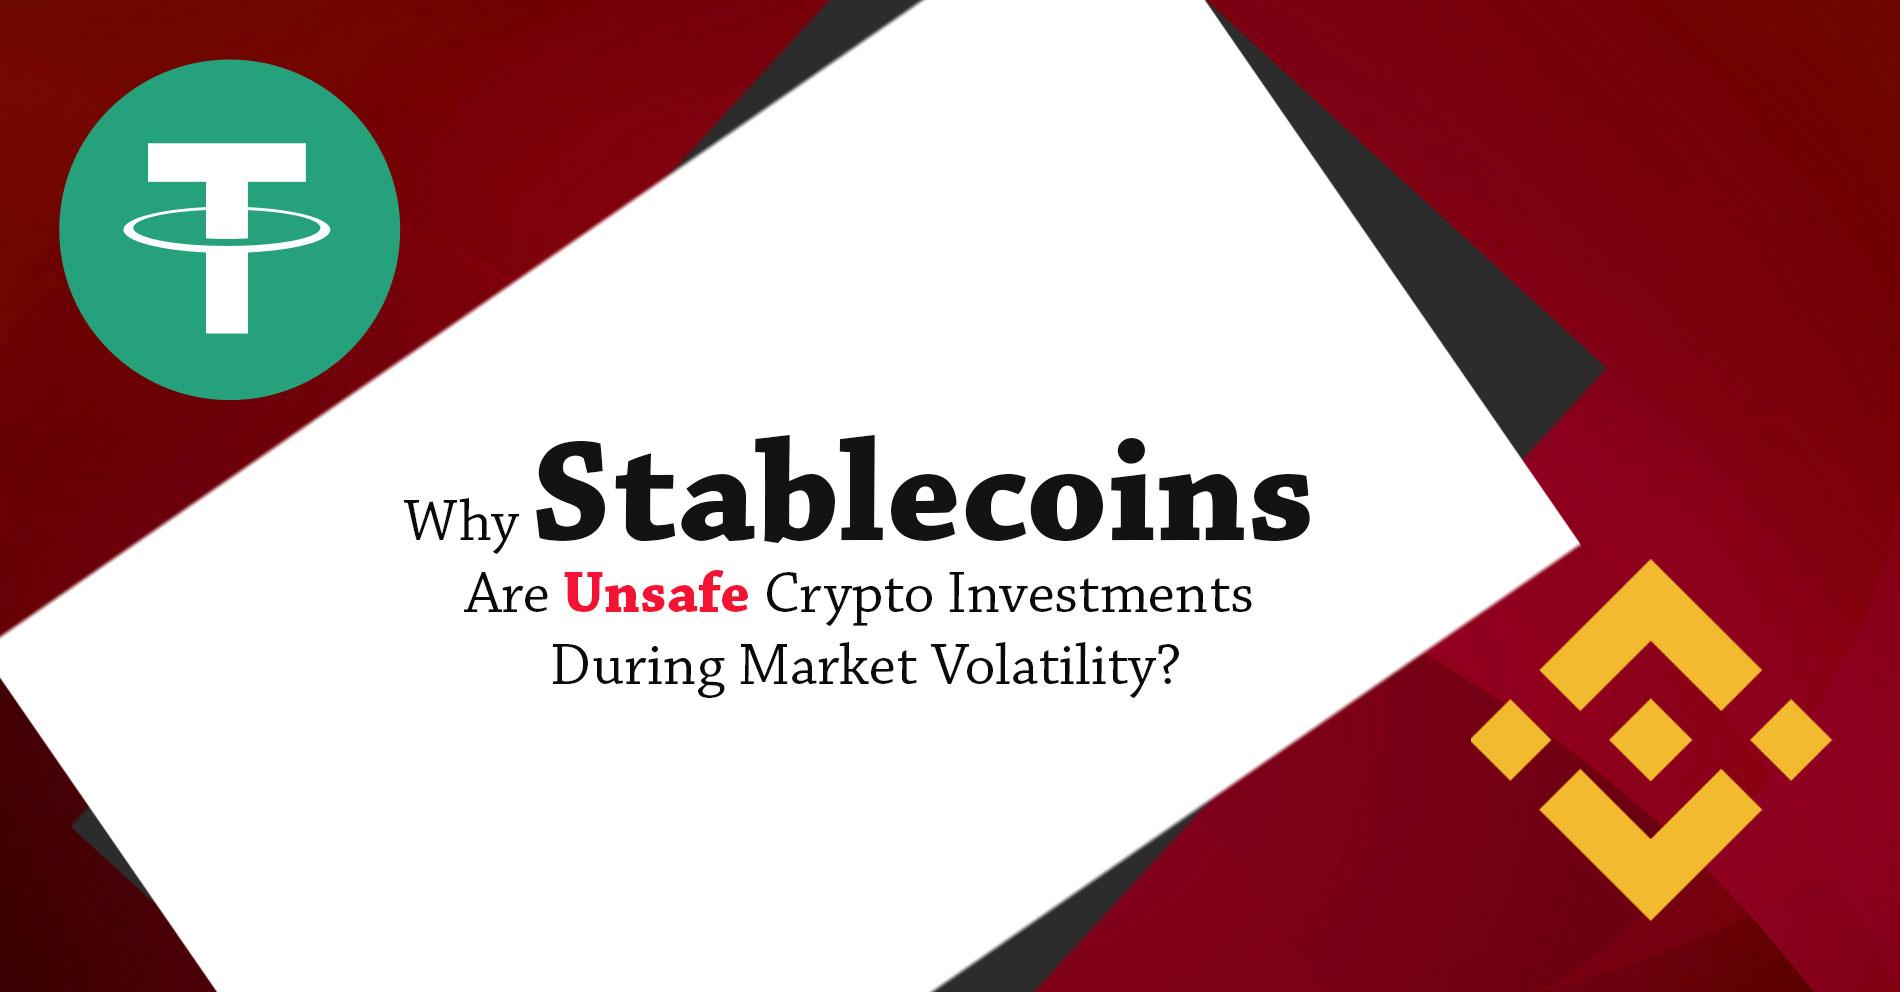 Why Stablecoins Are Unsafe Crypto Investments During Market Volatility?